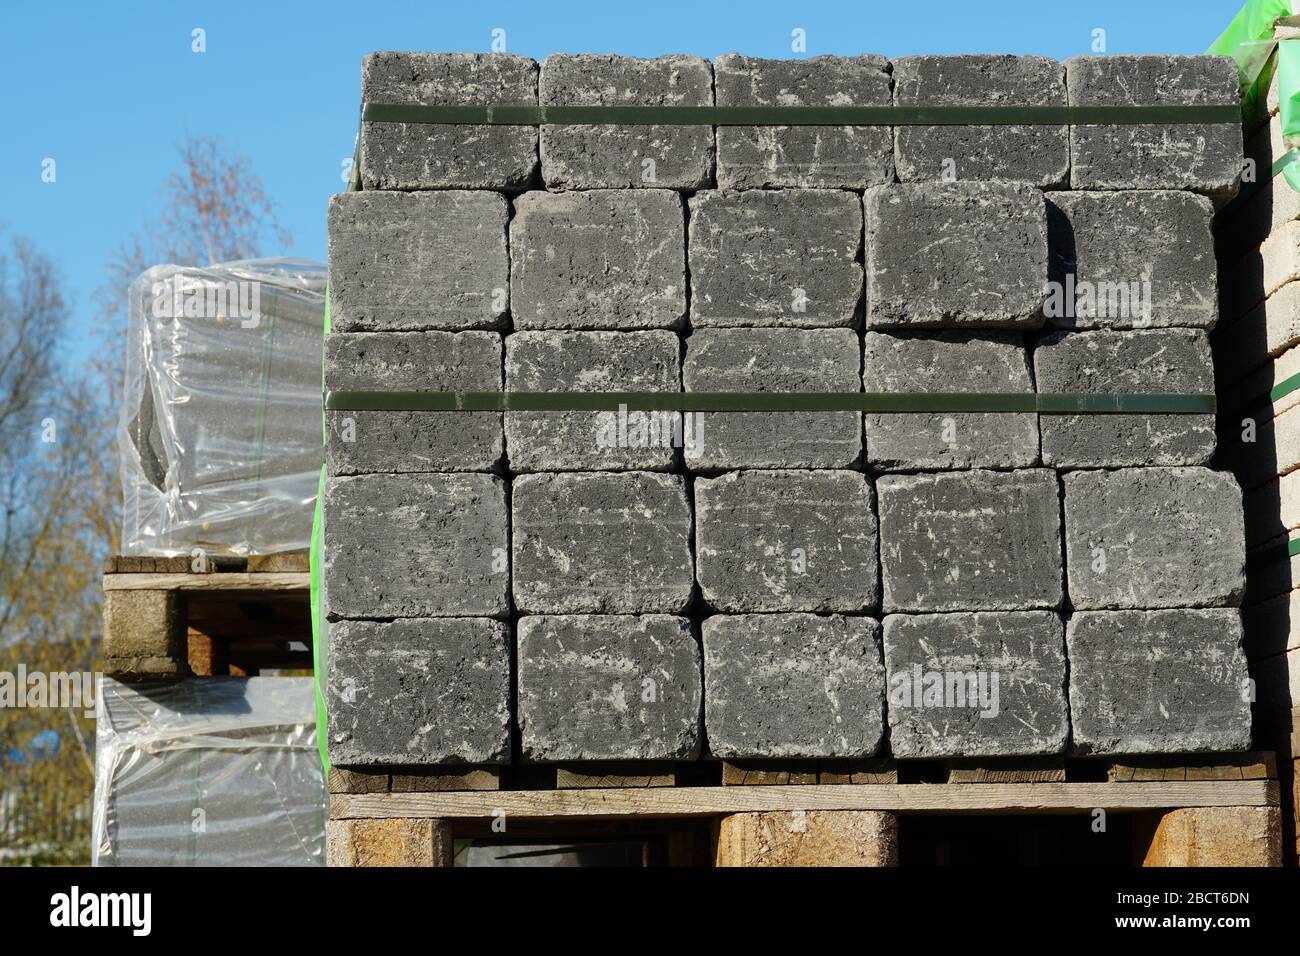 Concrete cubes or cobble stones stapled and attached pallettes in warehouse for building or construction material Stock Photo